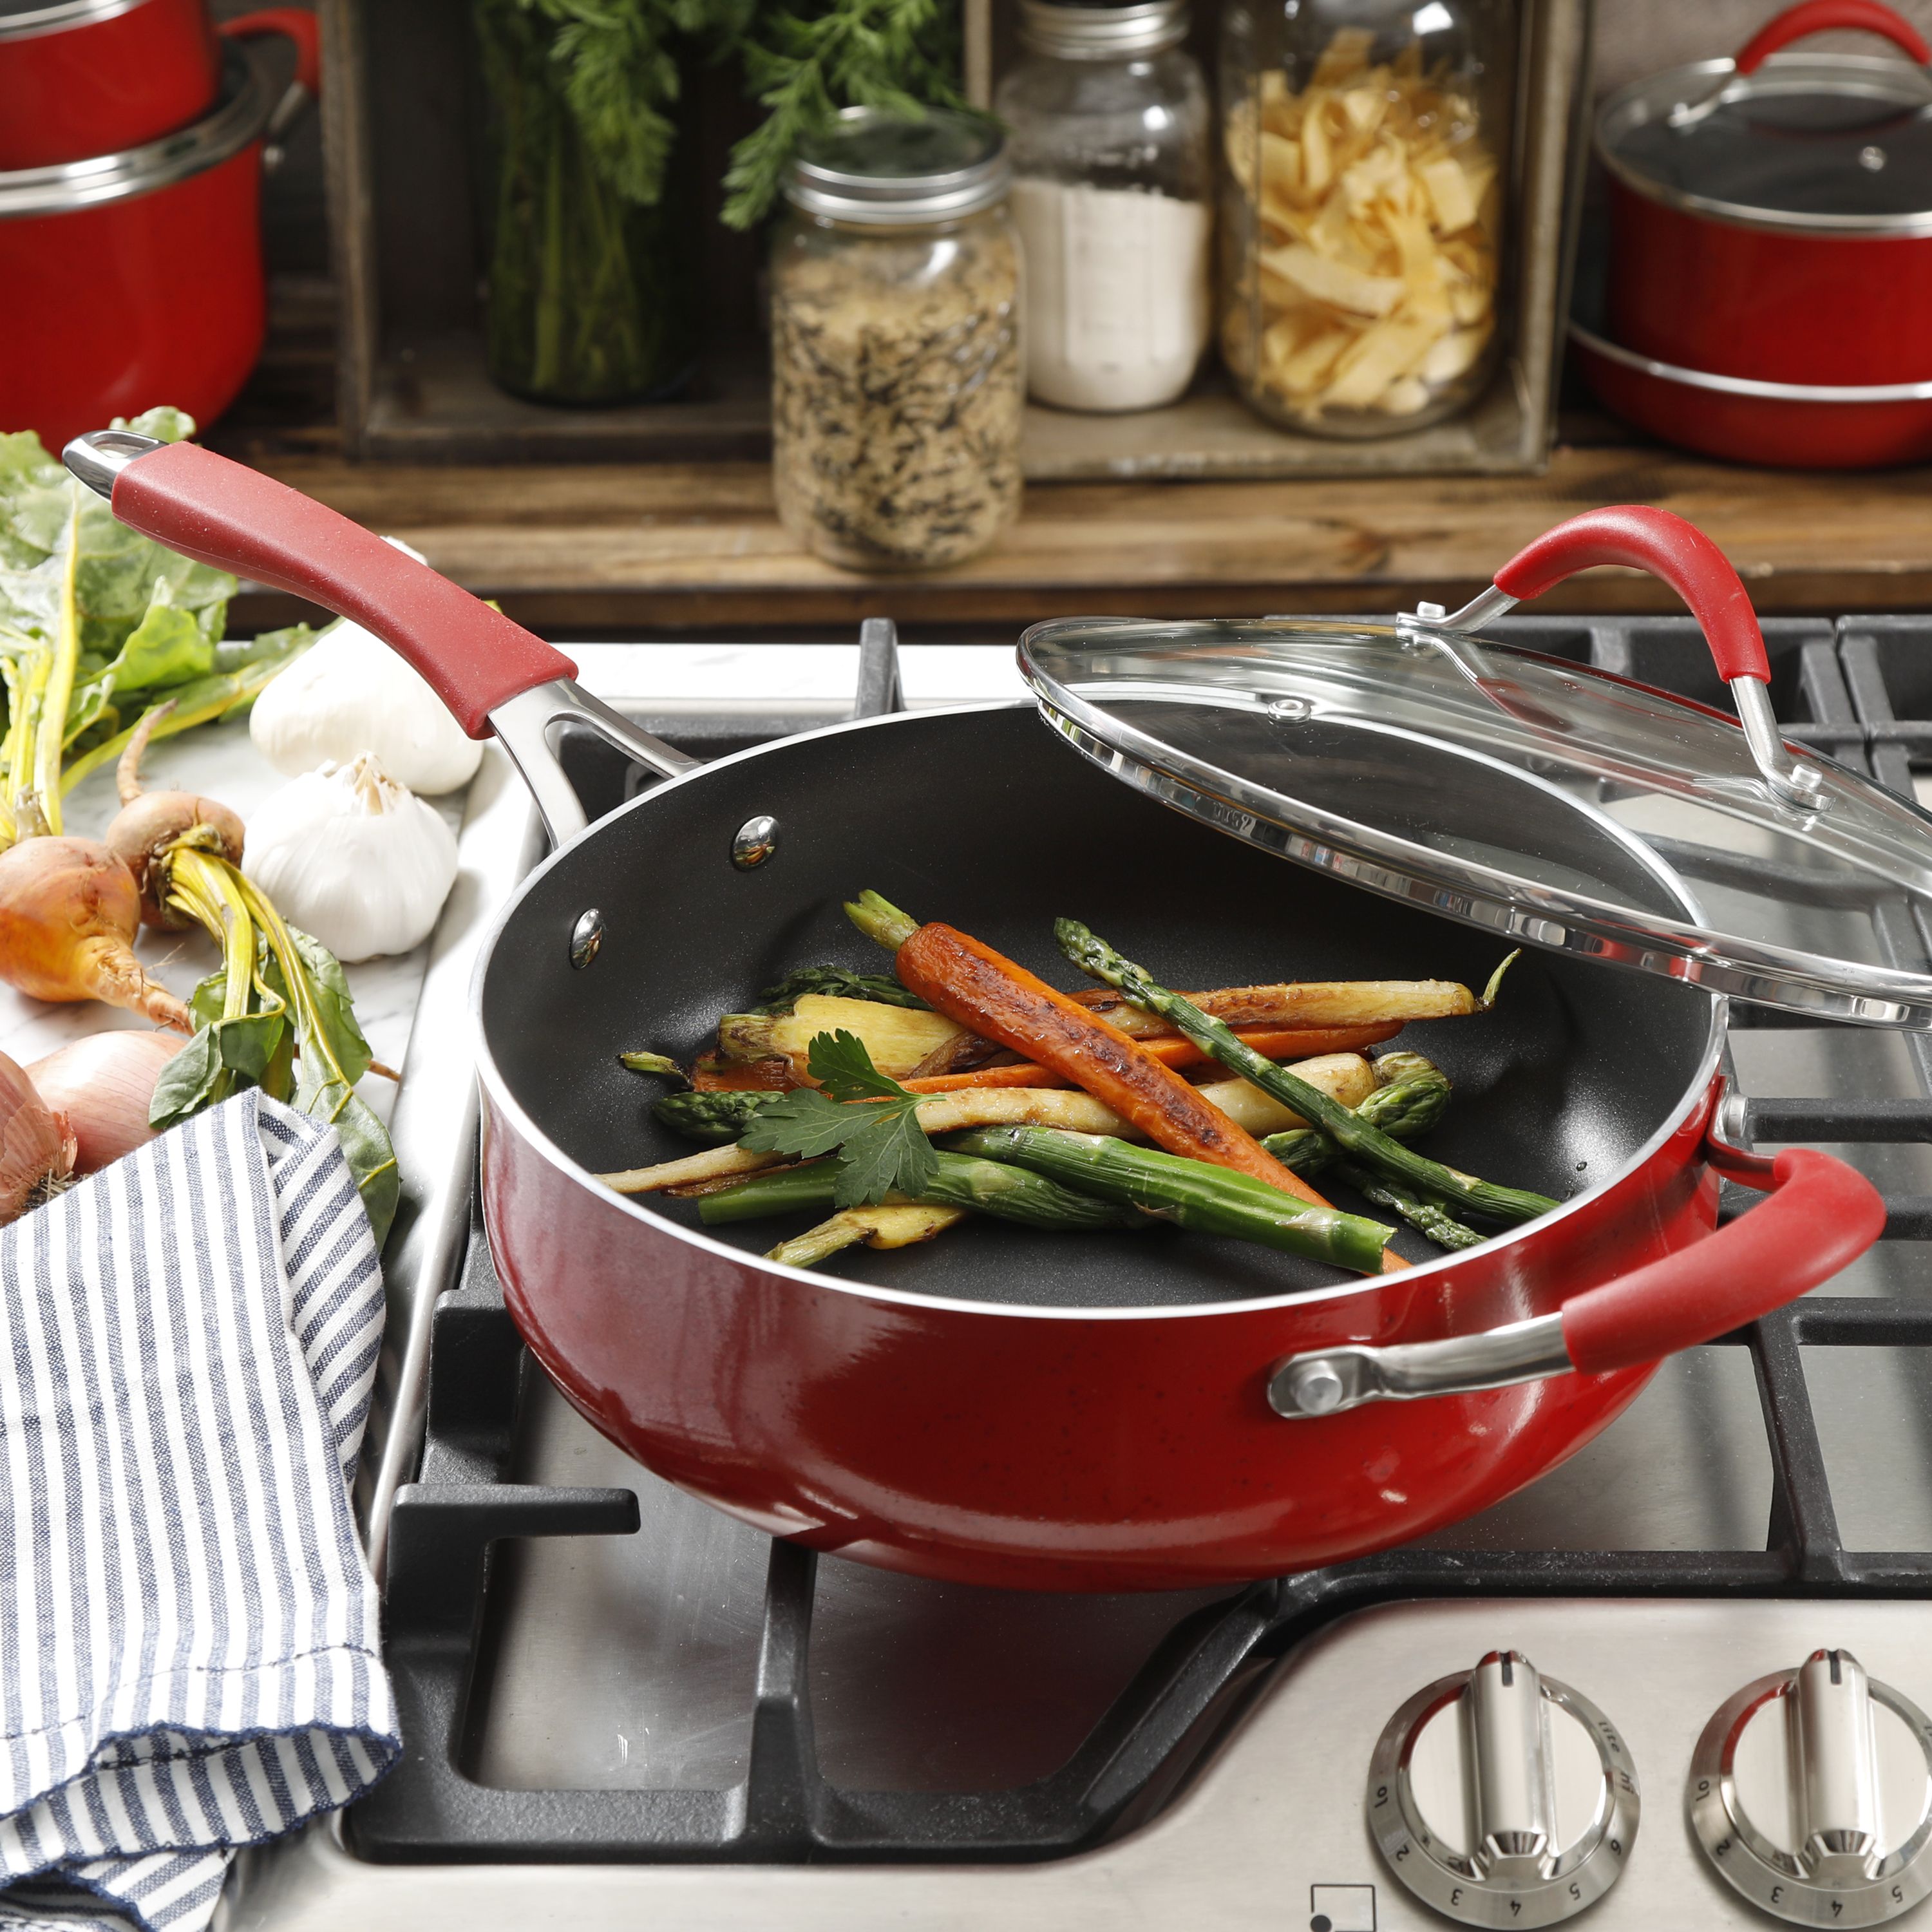 Brighten Your Day Giveaway #2: New PW Cookware Sets